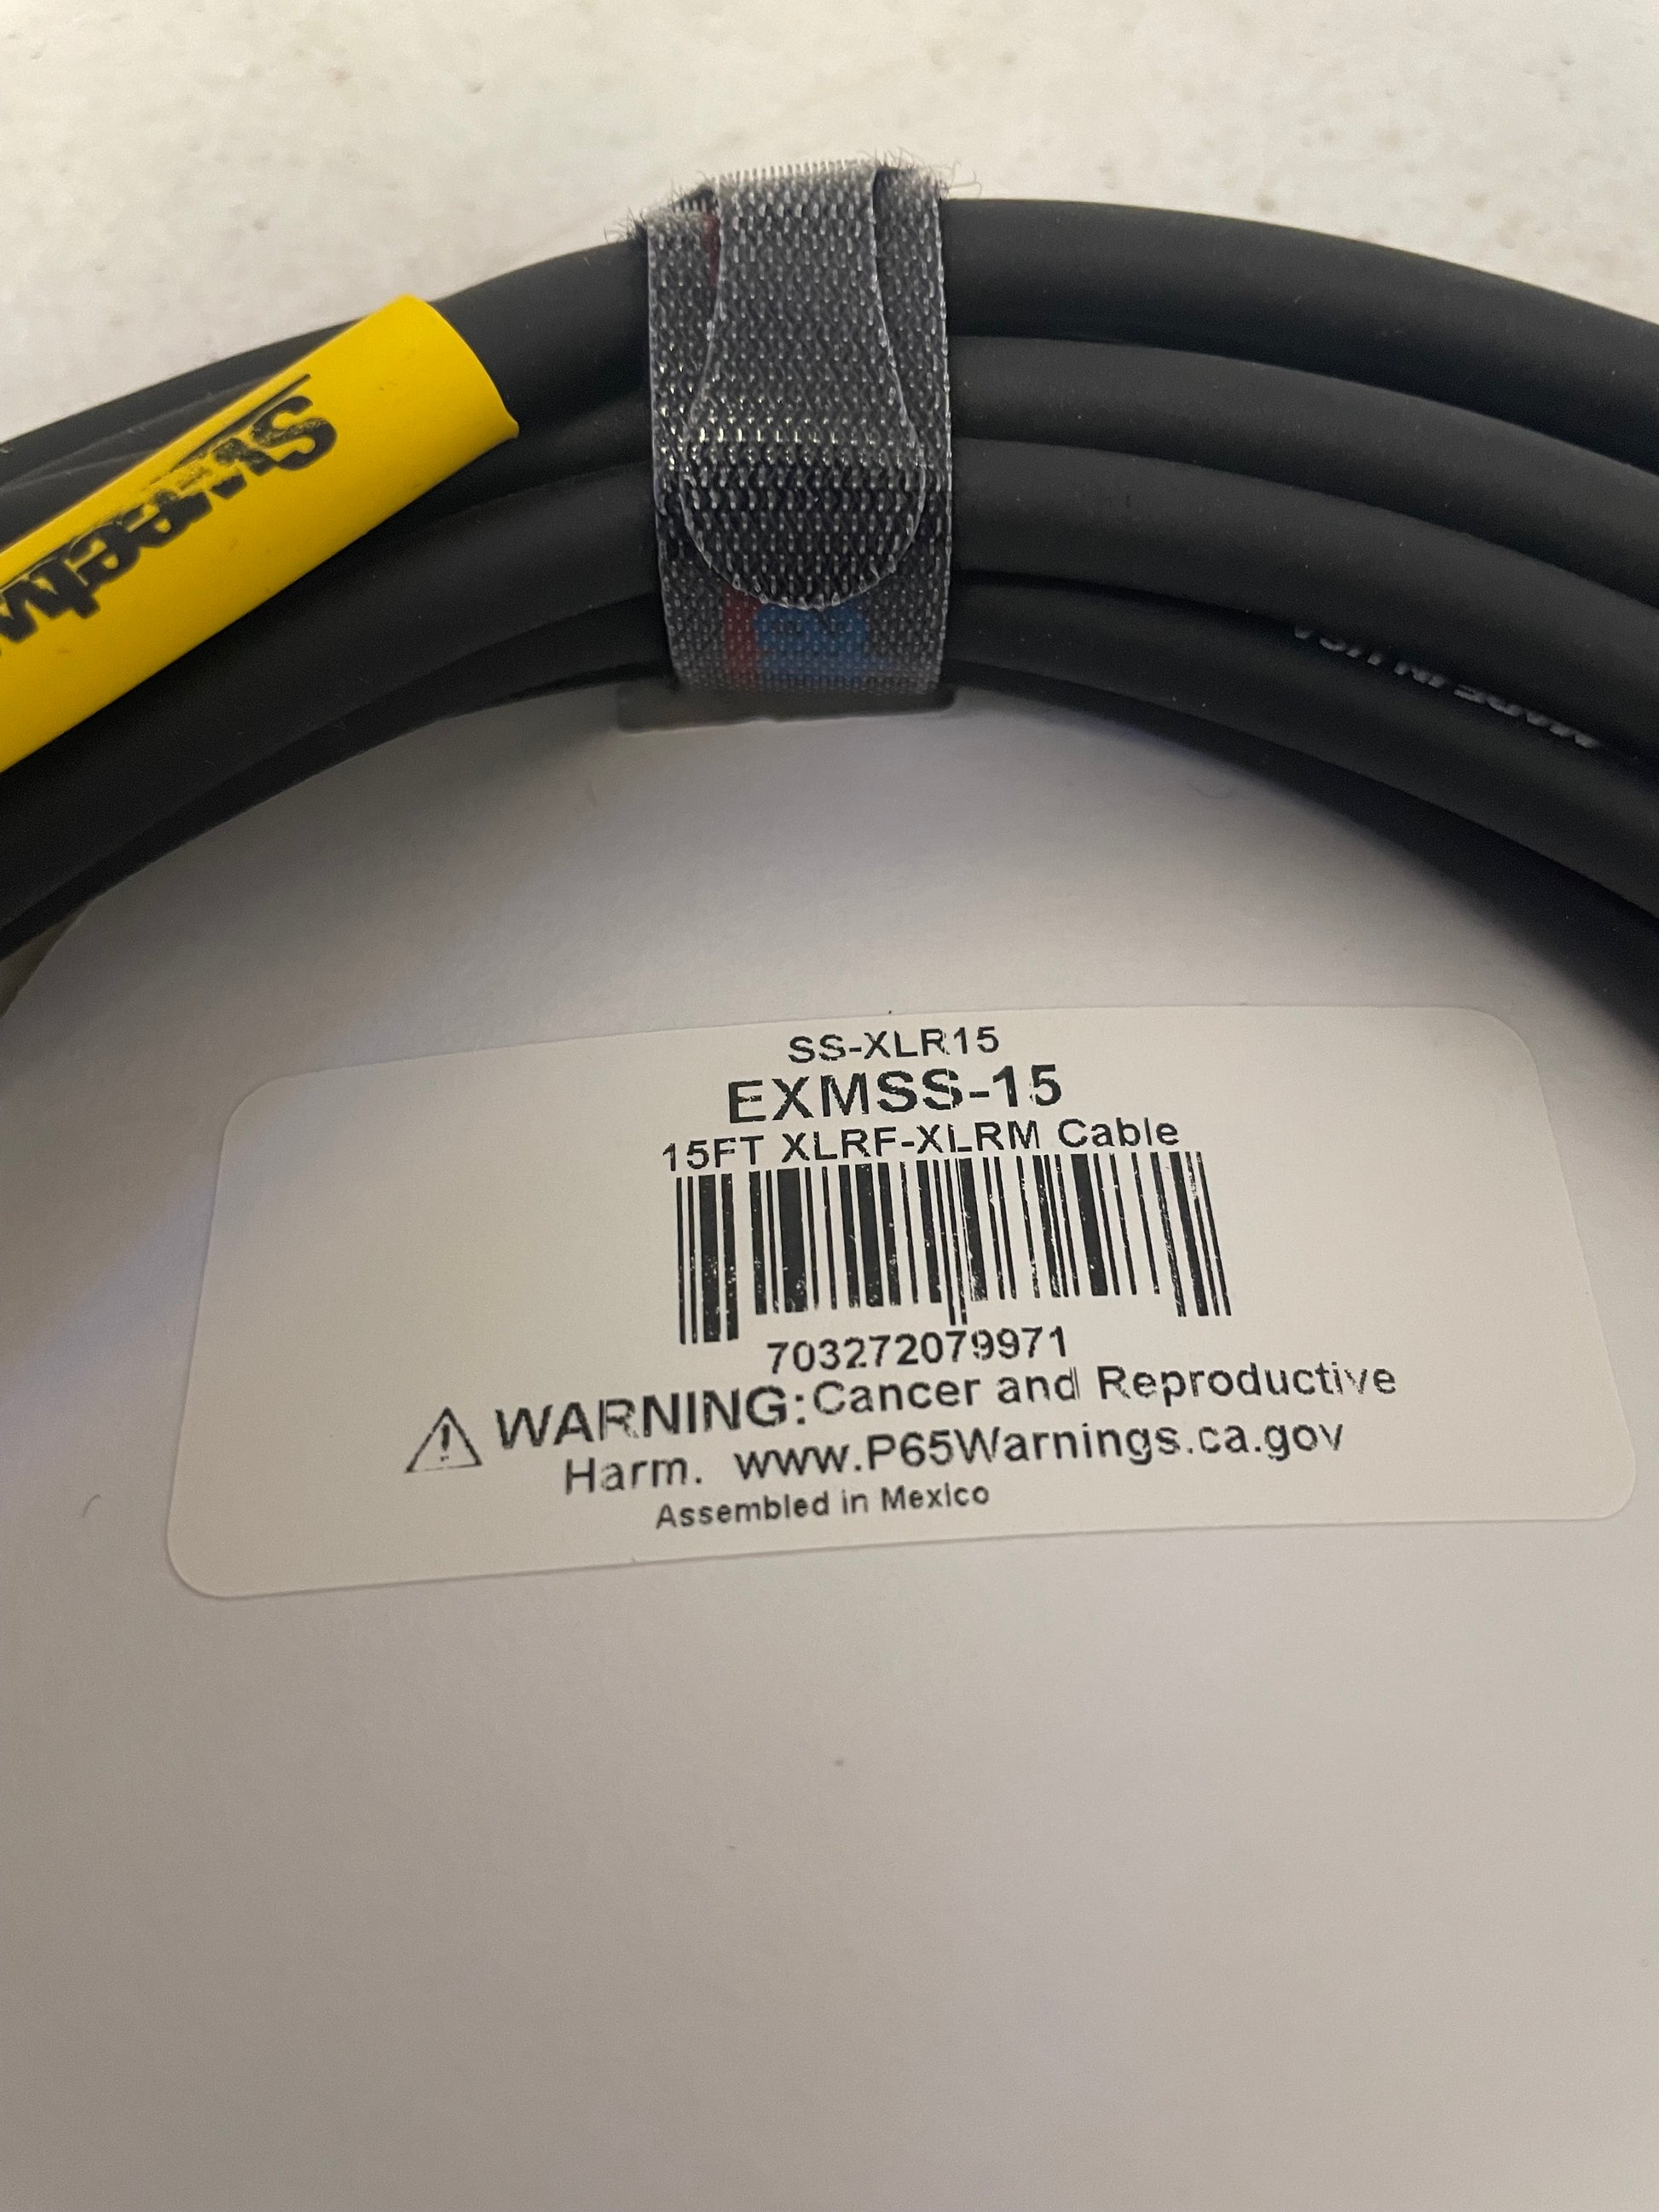 New Sweetwater Pro-Co 15' XLRF to XLRM Mic Cables, Lot of Five (5), Brand New for Sale. We Sell Professional Audio Equipment. Audio Systems, Amplifiers, Consoles, Mixers, Electronics, Entertainment, Sound, Live.